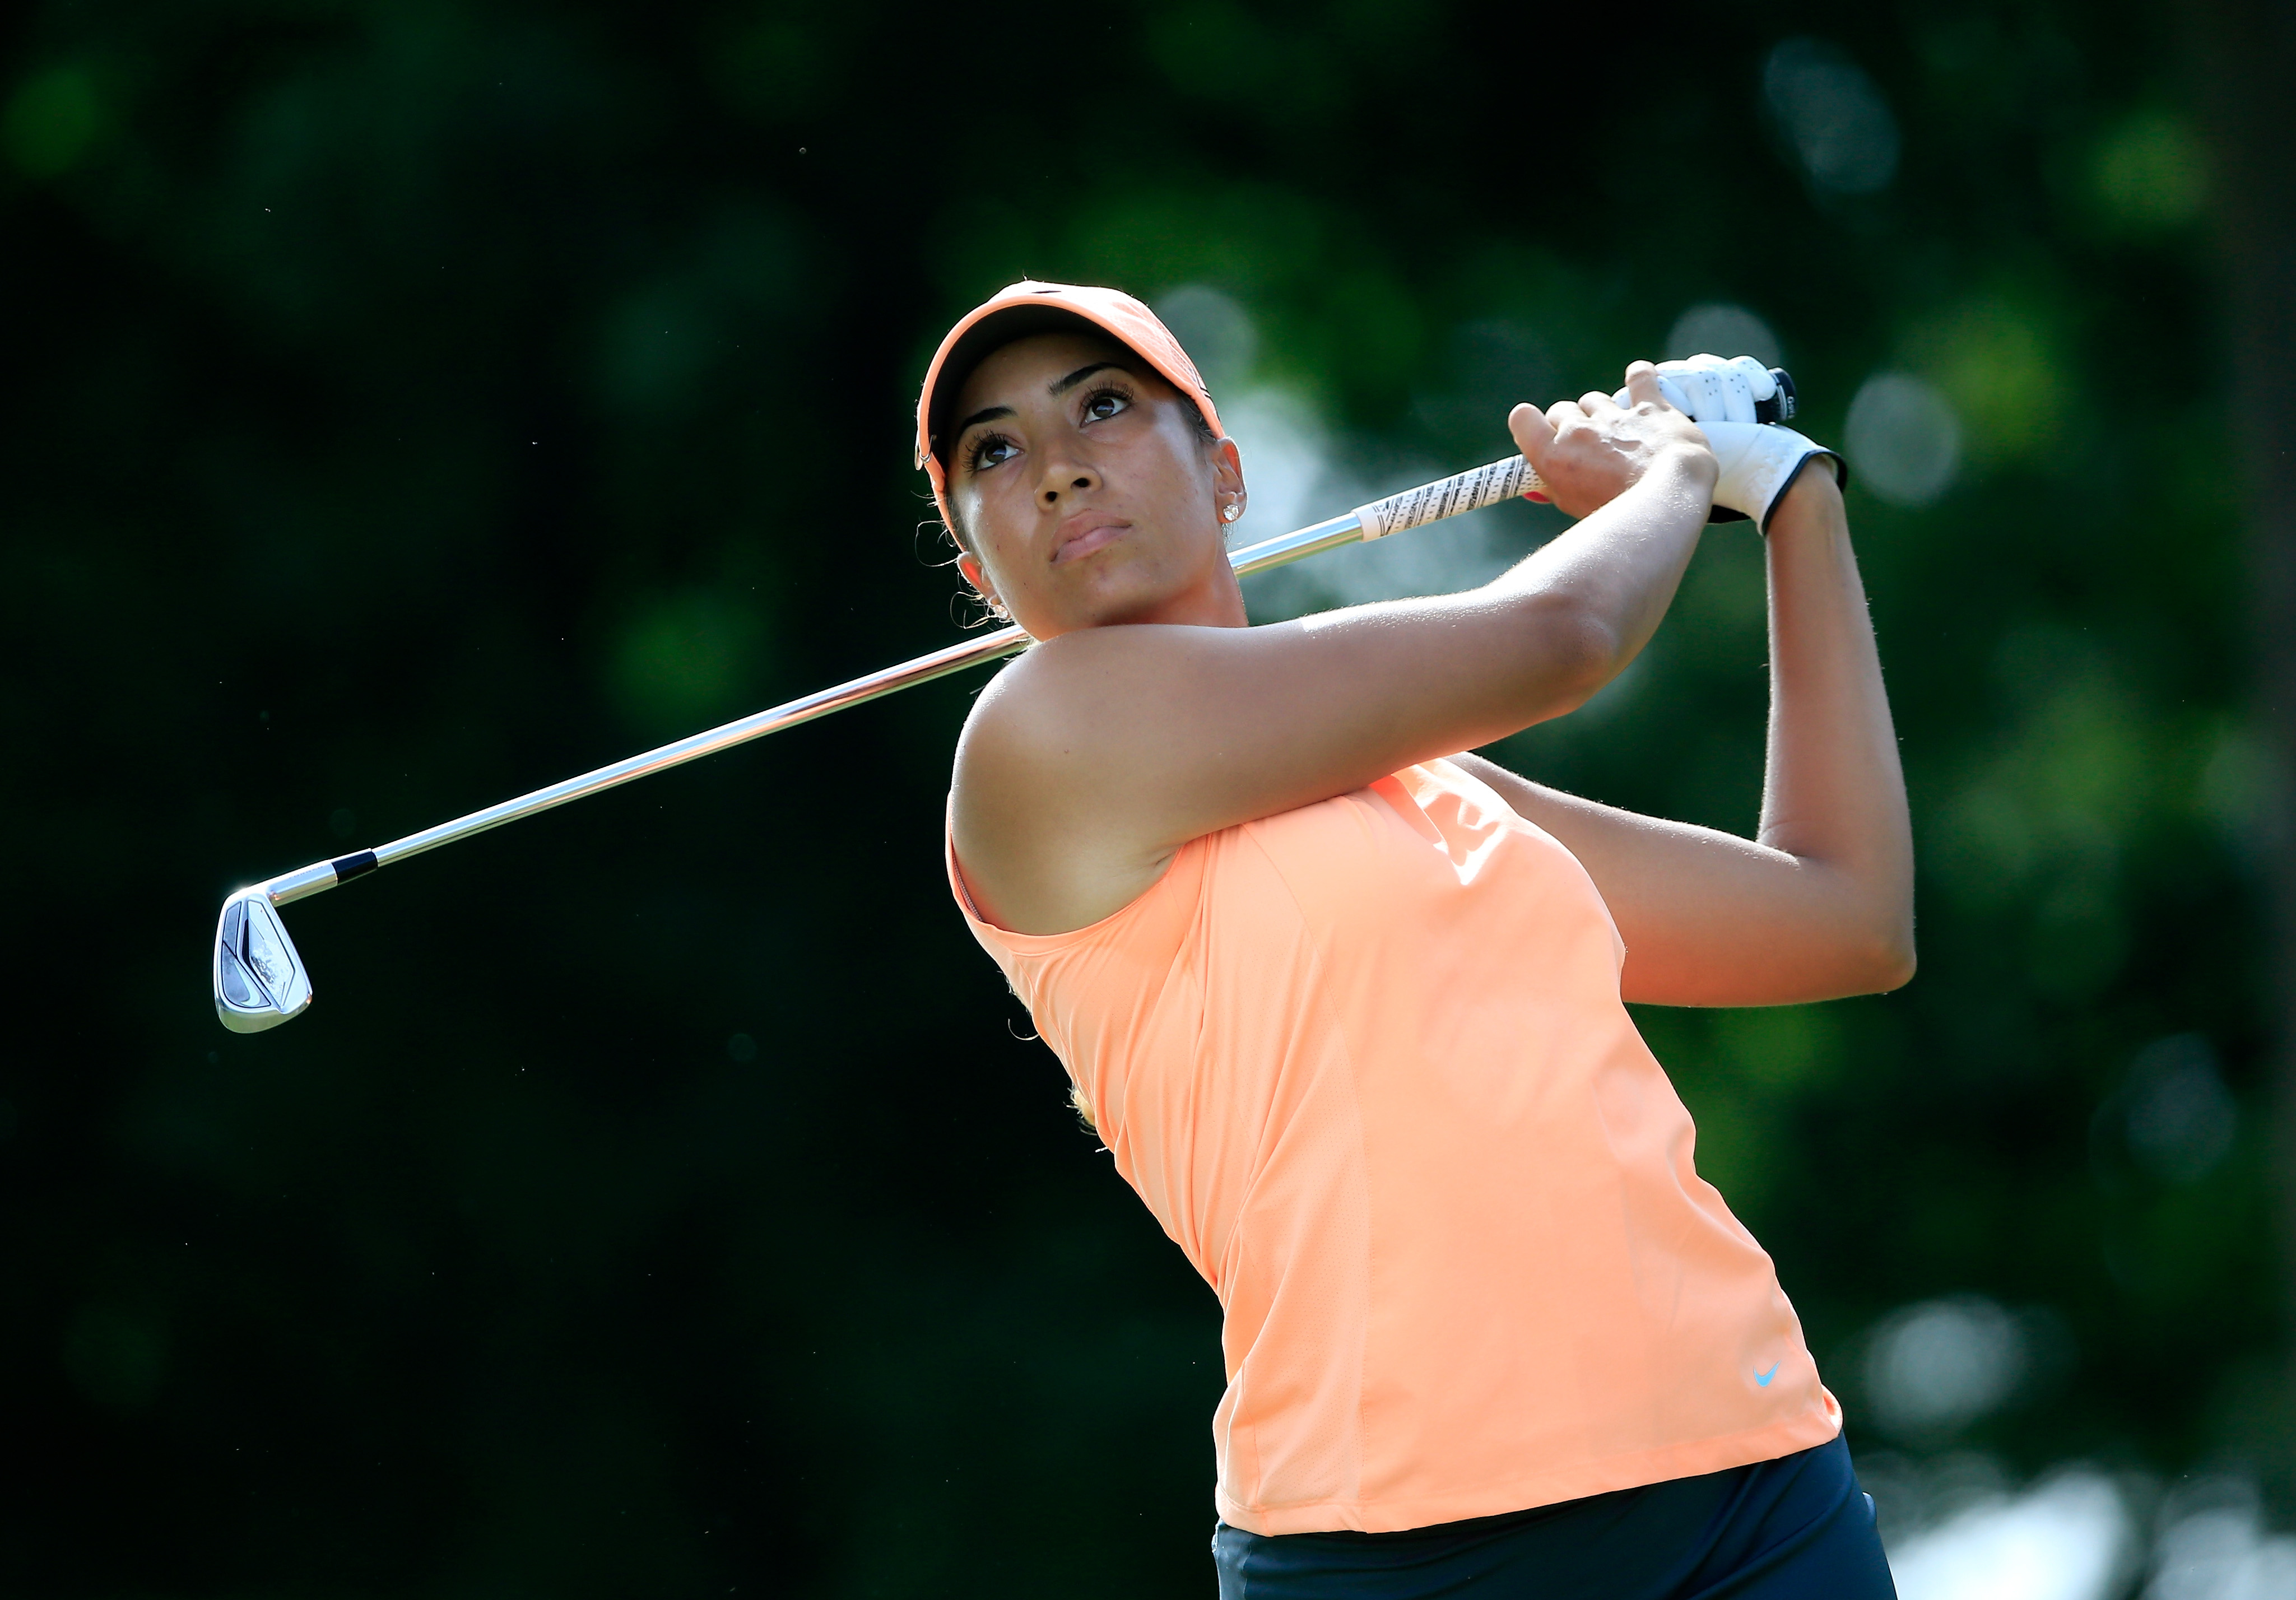 Cheyenne Woods plays on the LPGA Tour (Photo: Getty Images)